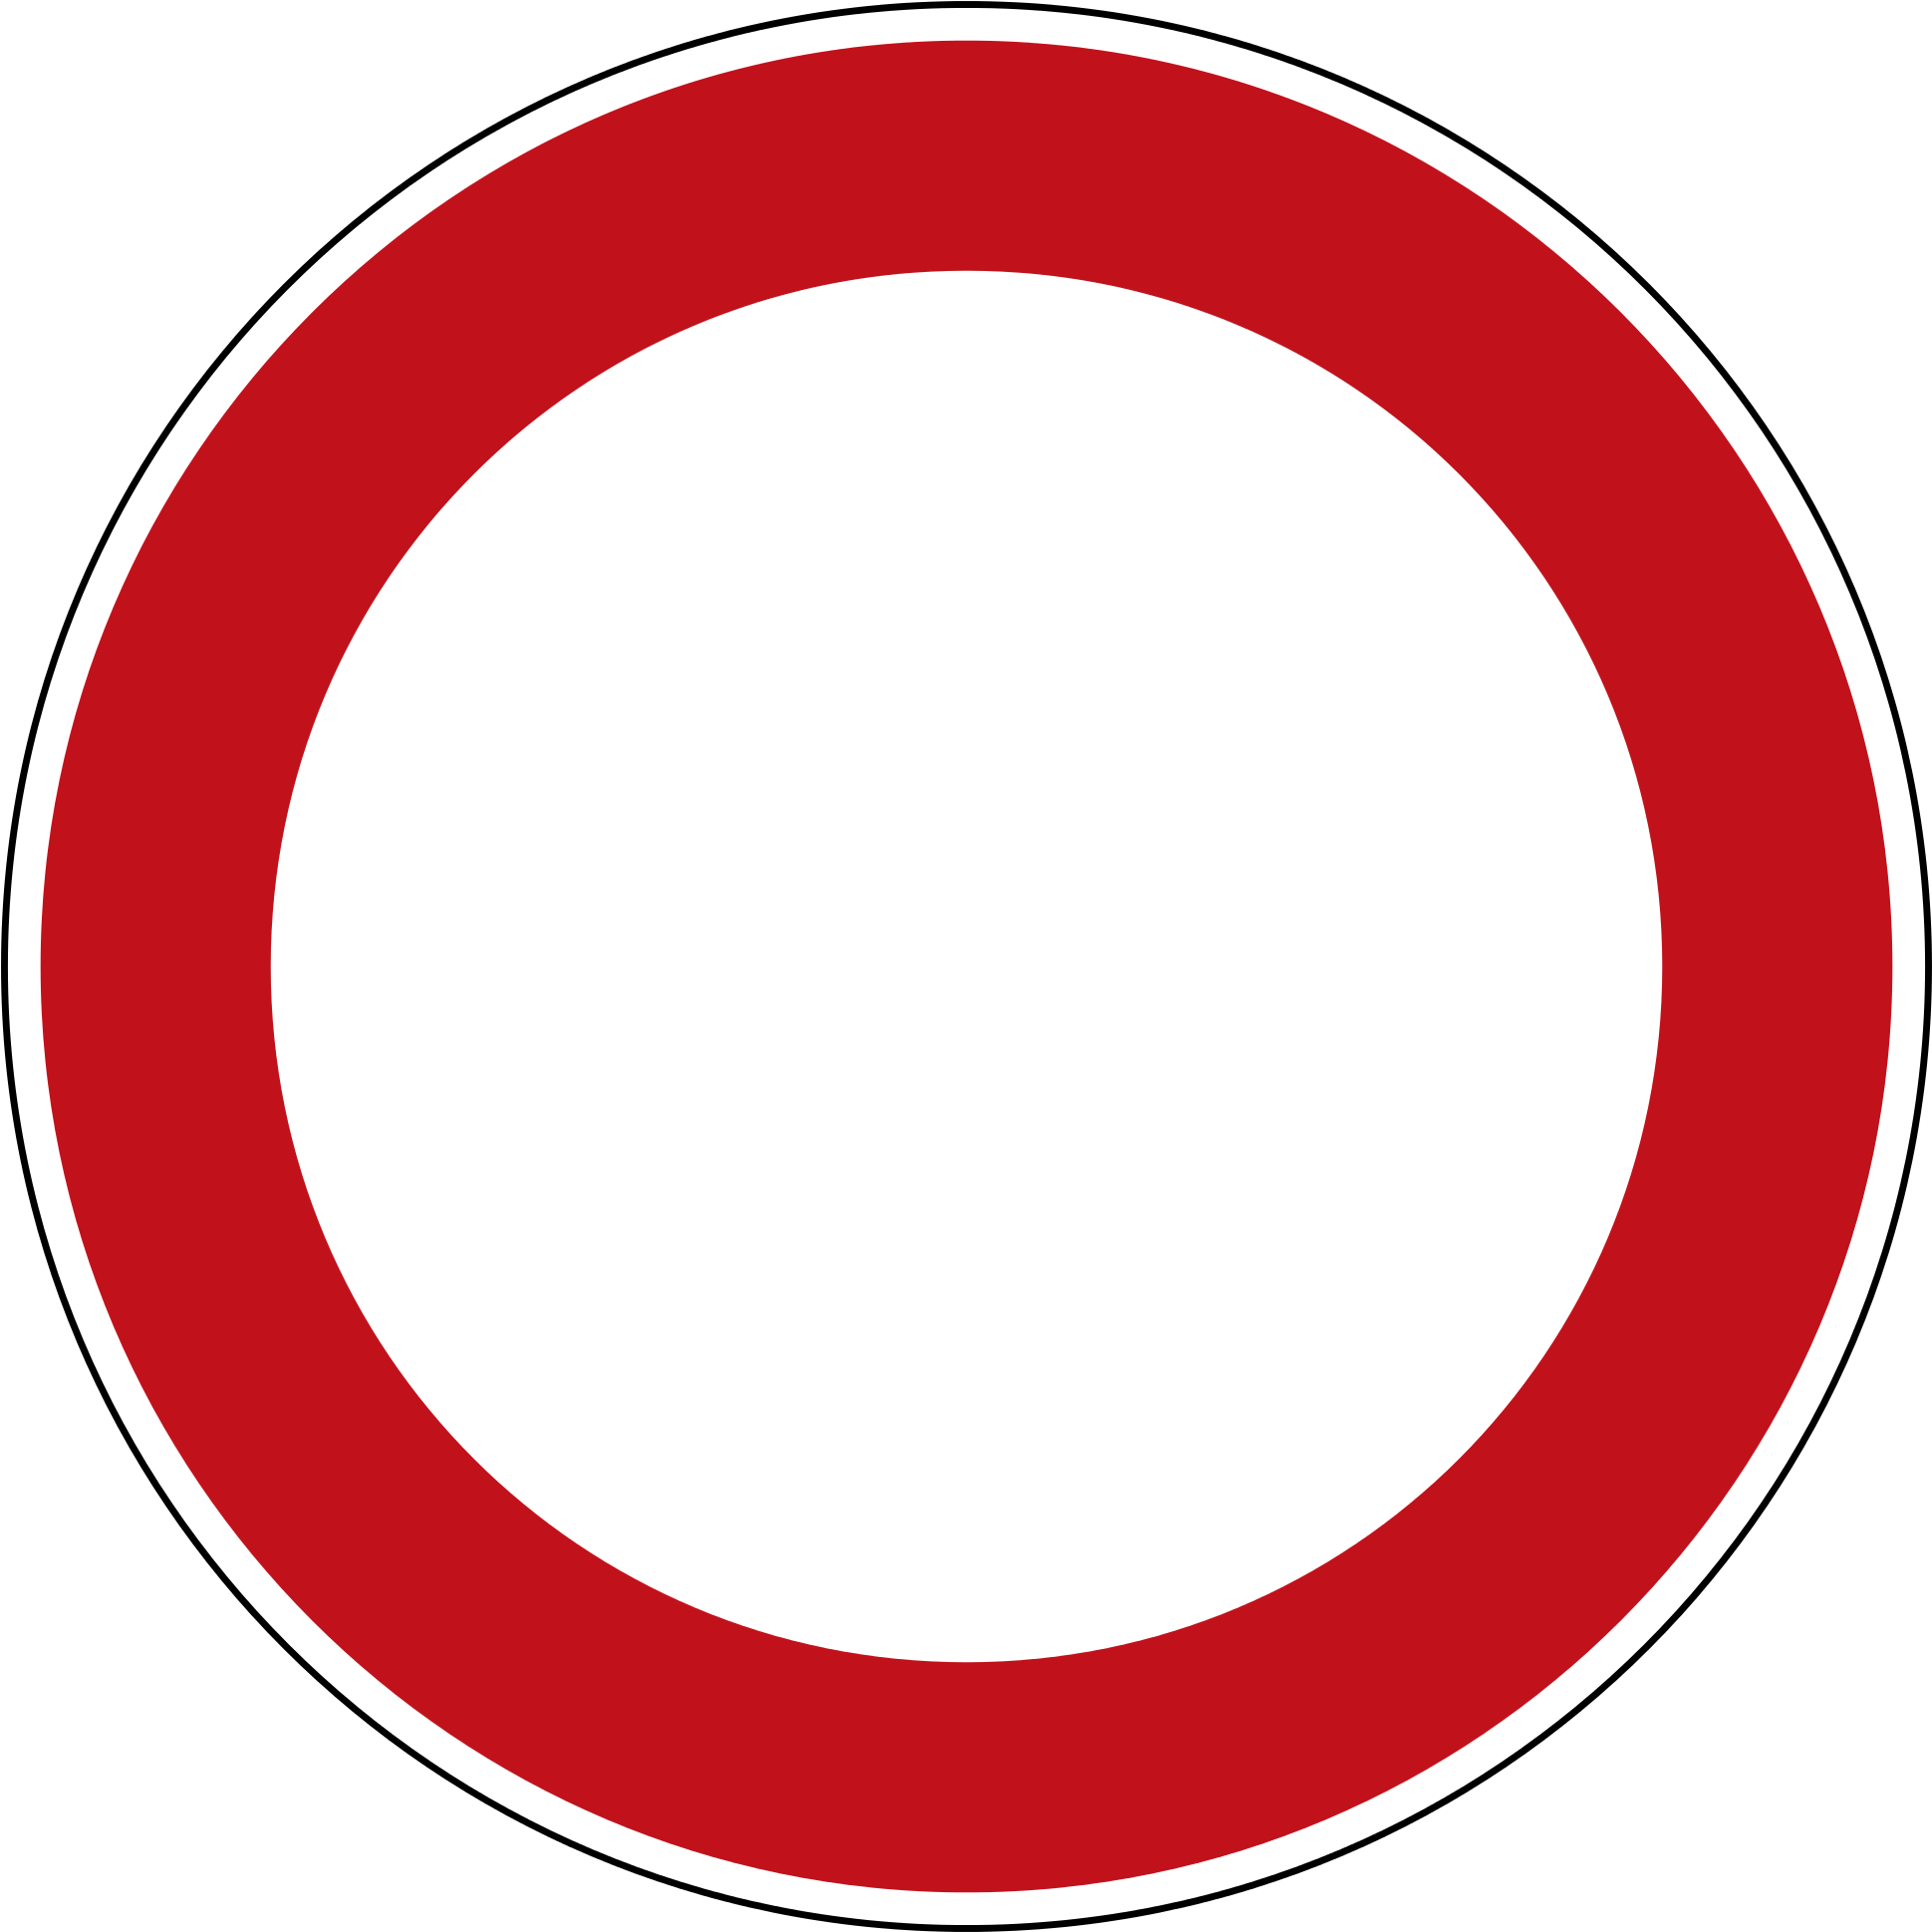 Open Simulation Interface/osi Trafficsign - Seal Of The United States (2000x2000)